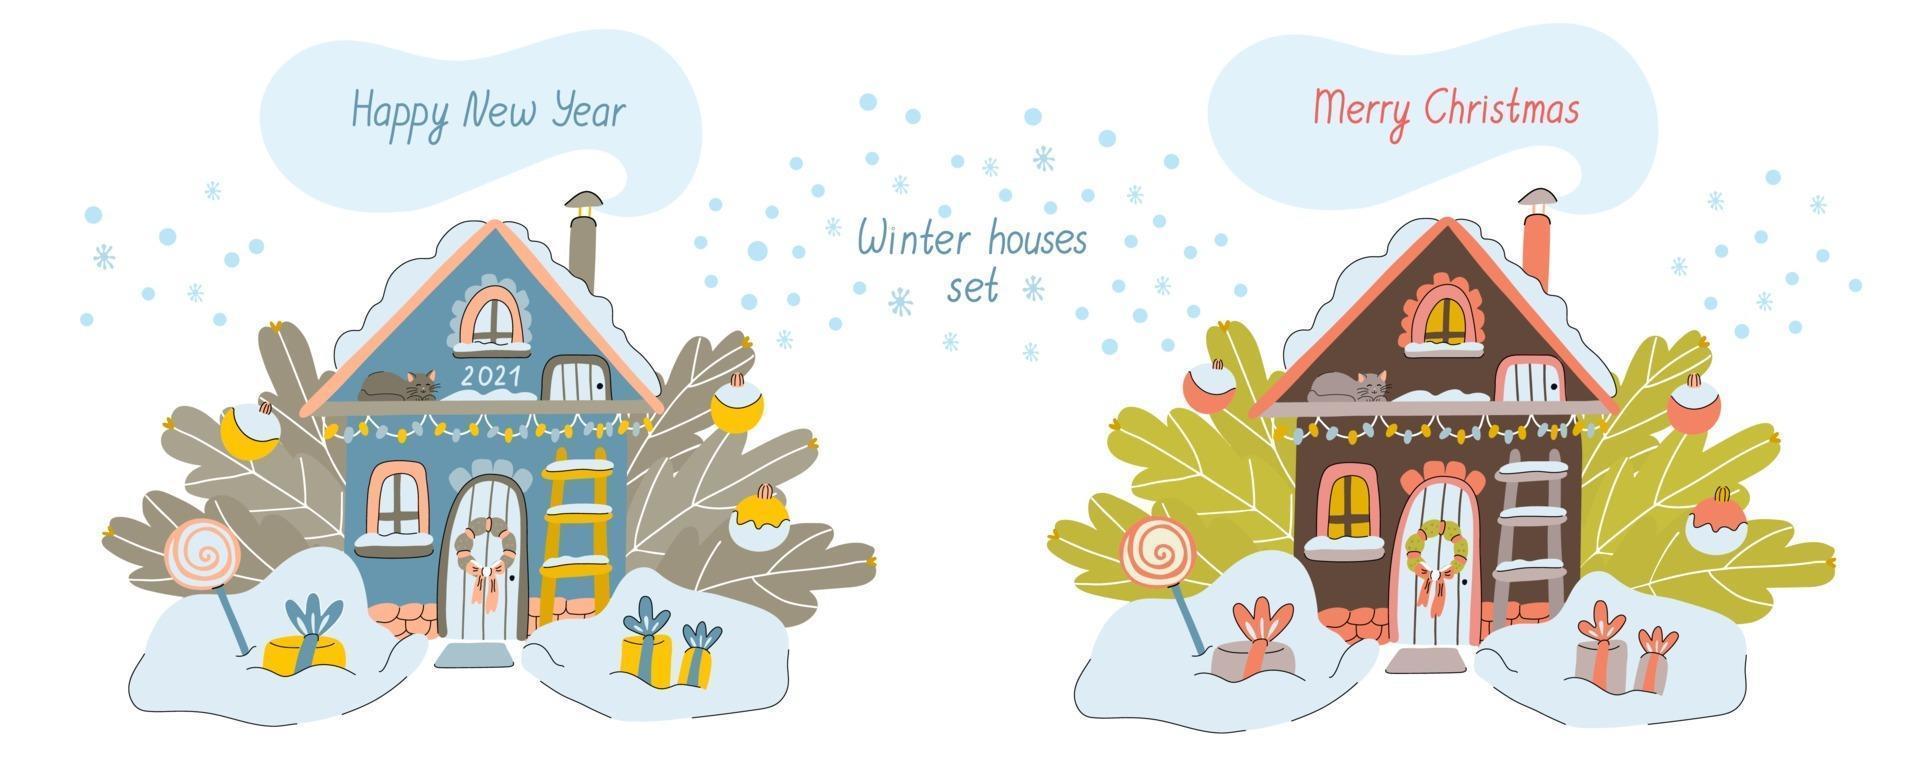 Winter houses with letterings Merry Christmas and Happy New Year vector